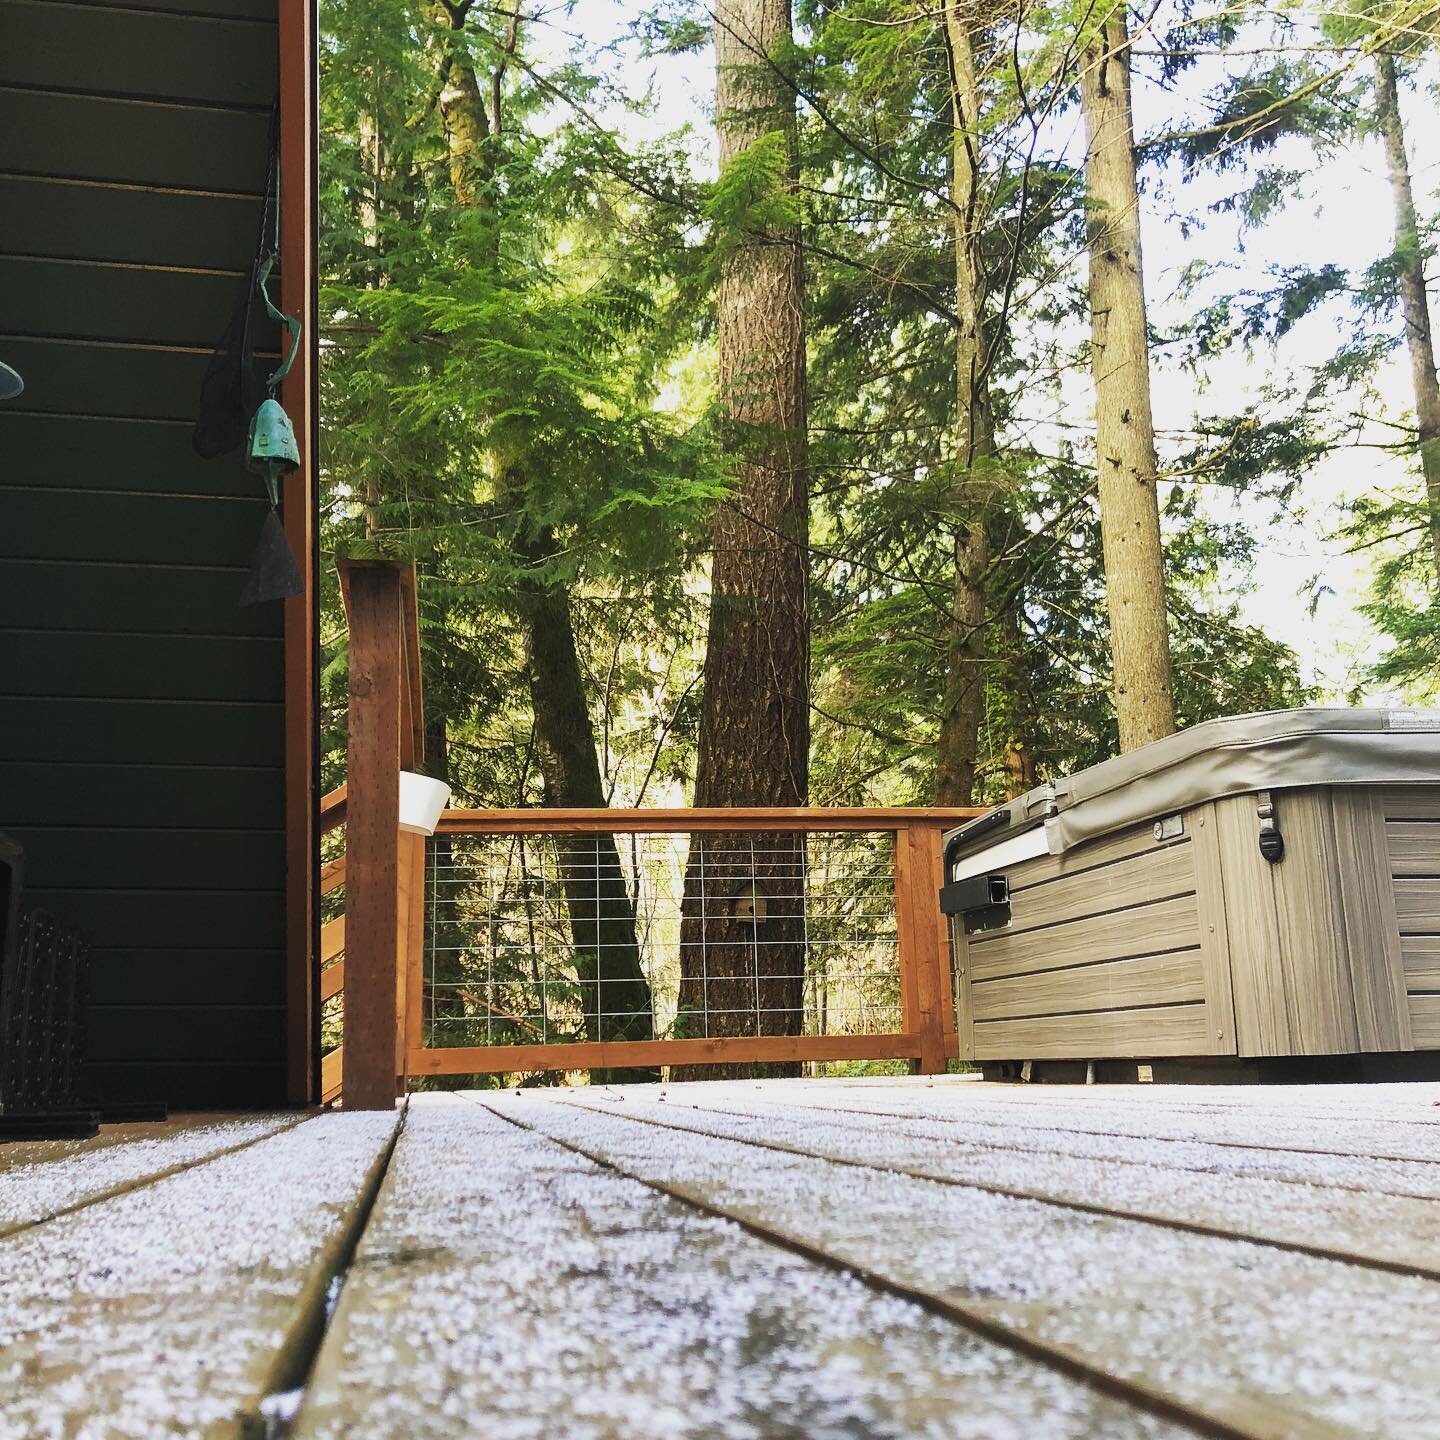 It&rsquo;s a brisk winters day, perfect for getting in some powder at @therealmtbakerskiarea. Hit the mountain, get a pizza at @north_fork_brewery, then soak away under the stars in the hot tub. You&rsquo;ll be ready for bed tucked under the eaves #w